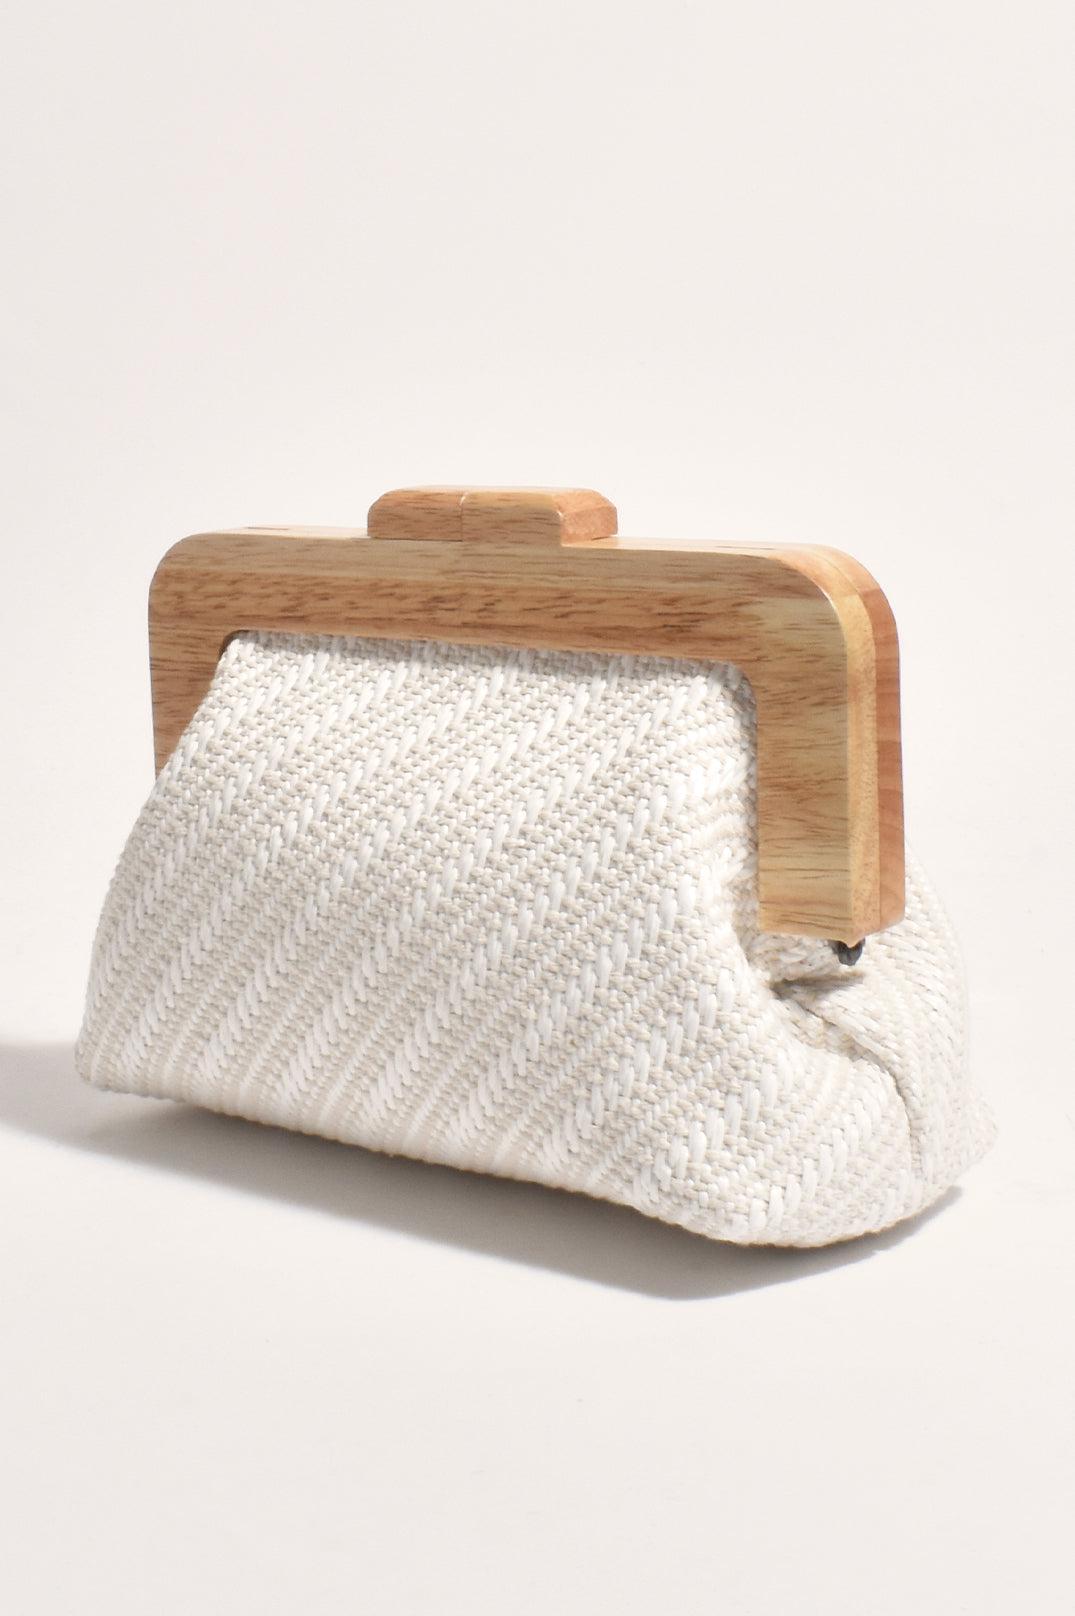 Tessa Diagonal Weave Timber Frame Clutch - White-Bags & Clutches-Adorne-The Bay Room